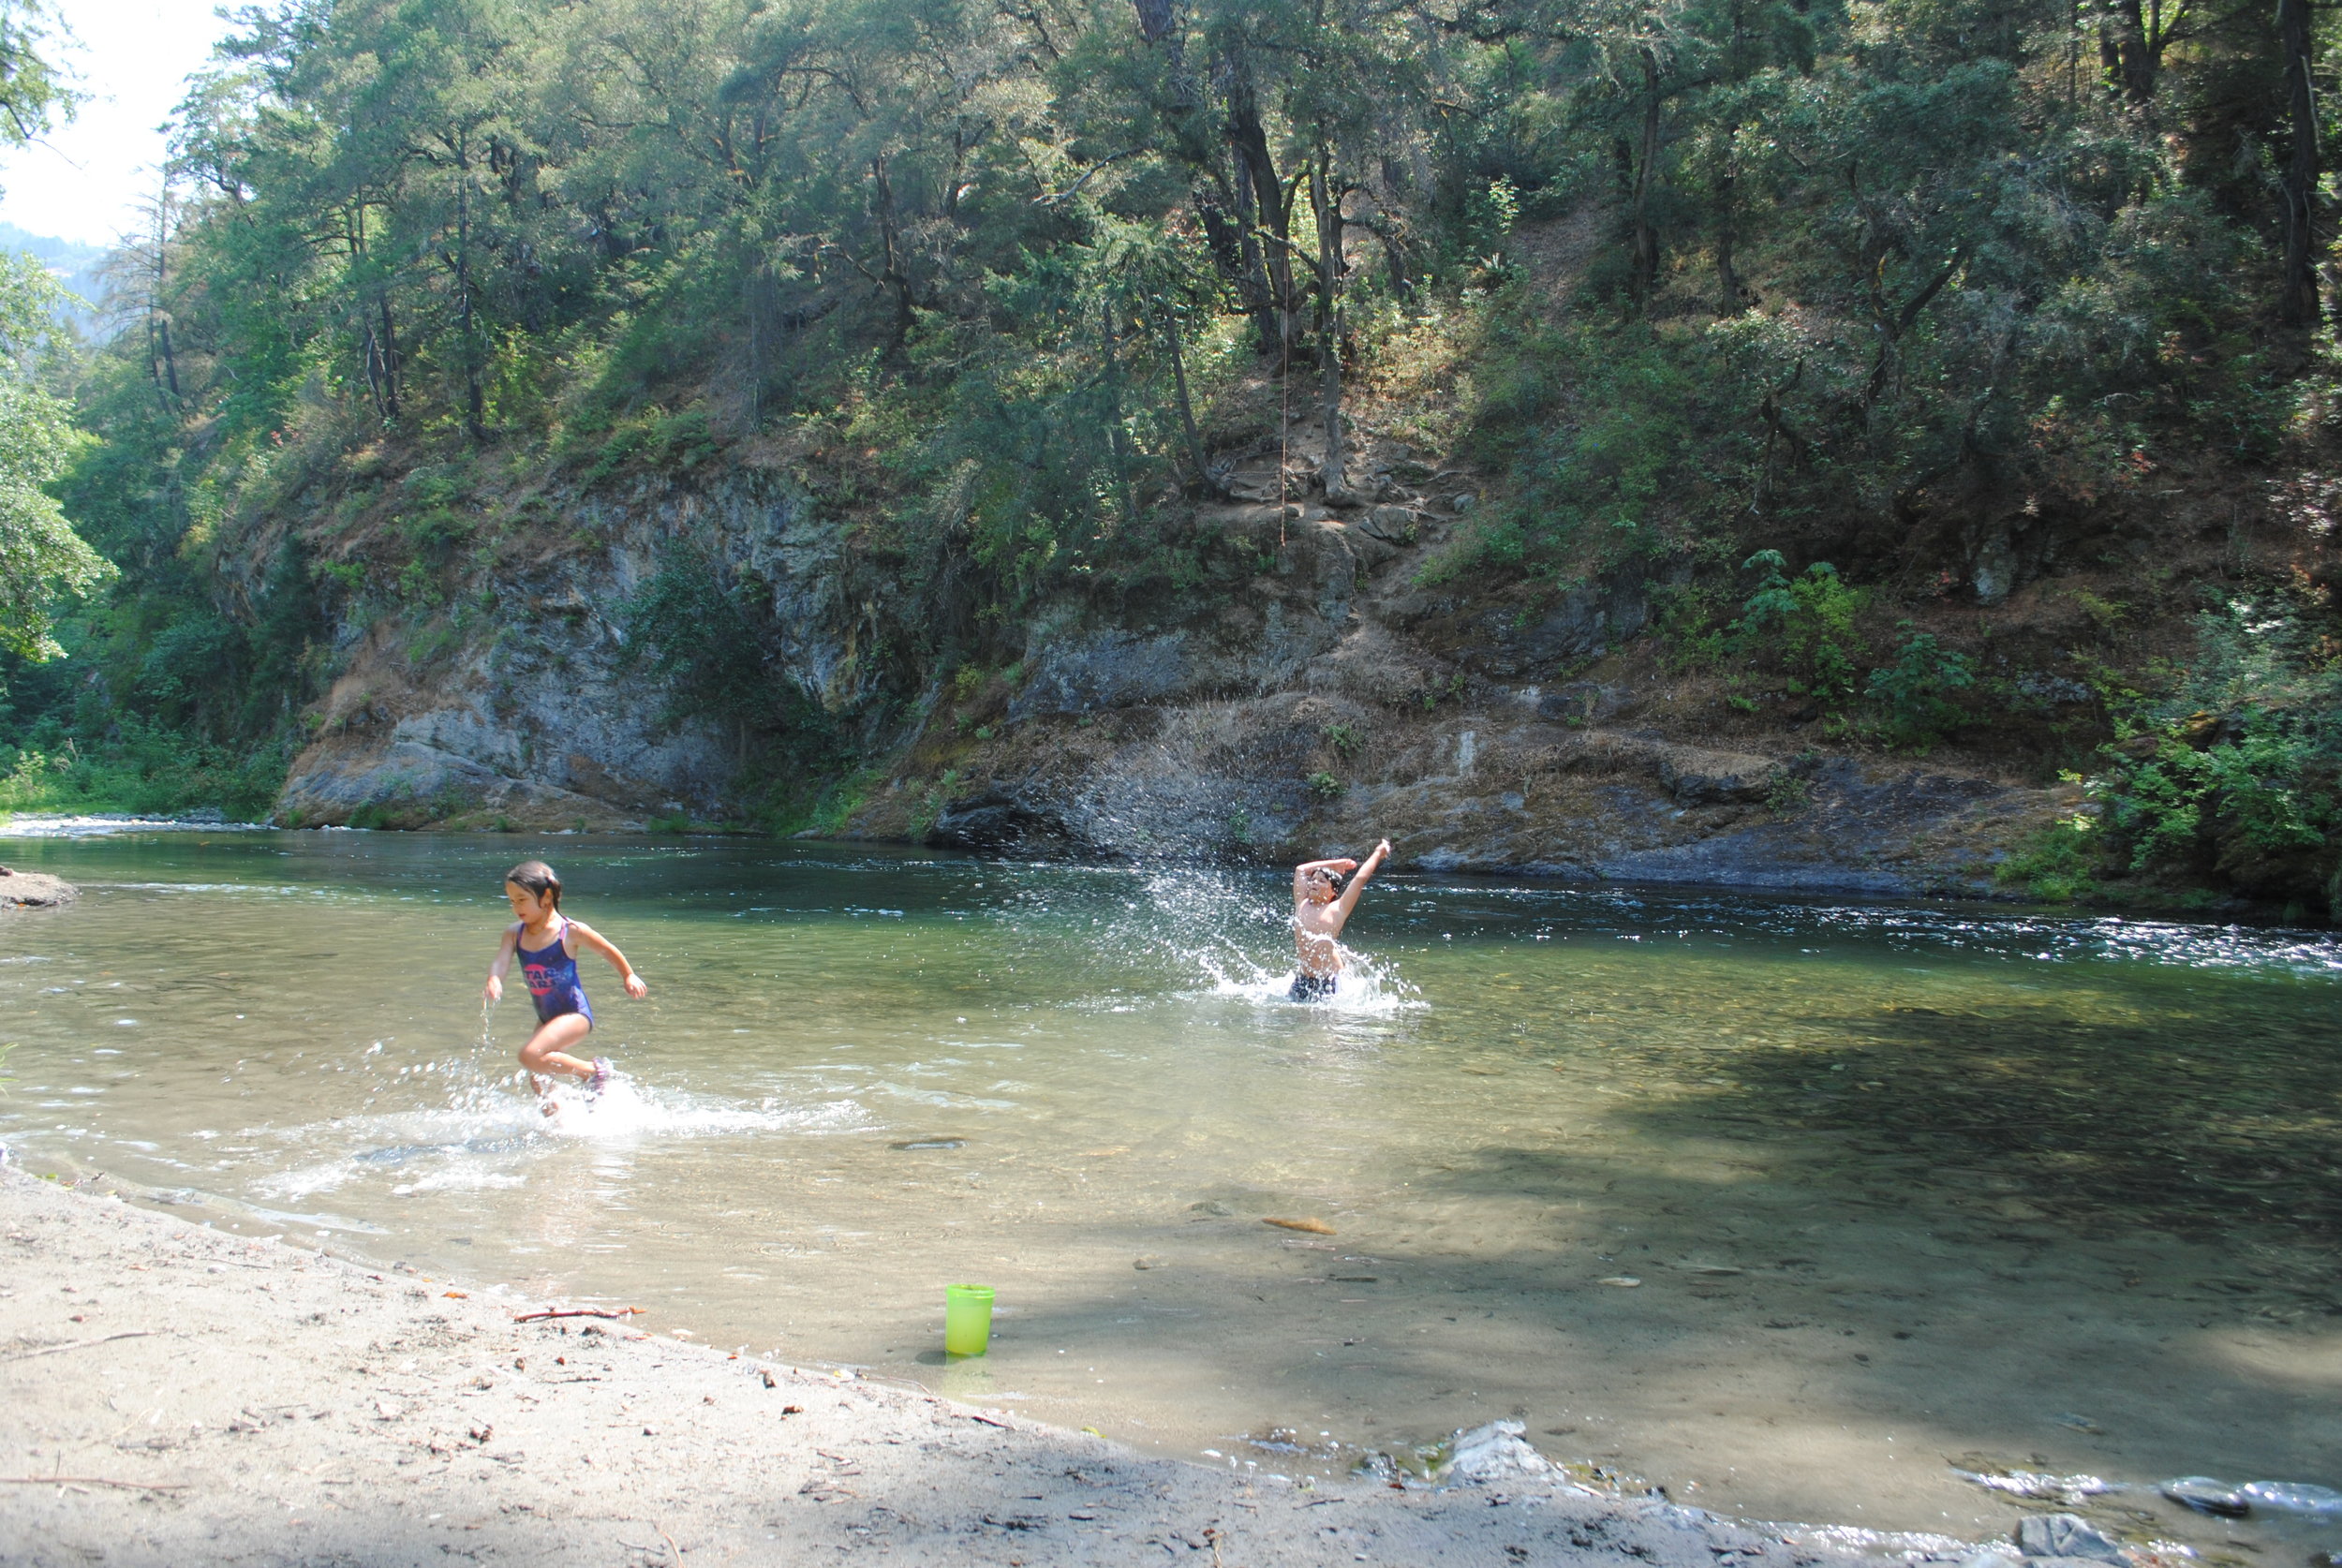 MCKEE BRIDGE - Swimming Hole - What to do in Southern Oregon - Outdoor Adventures - Fun with Kids - Applegate River